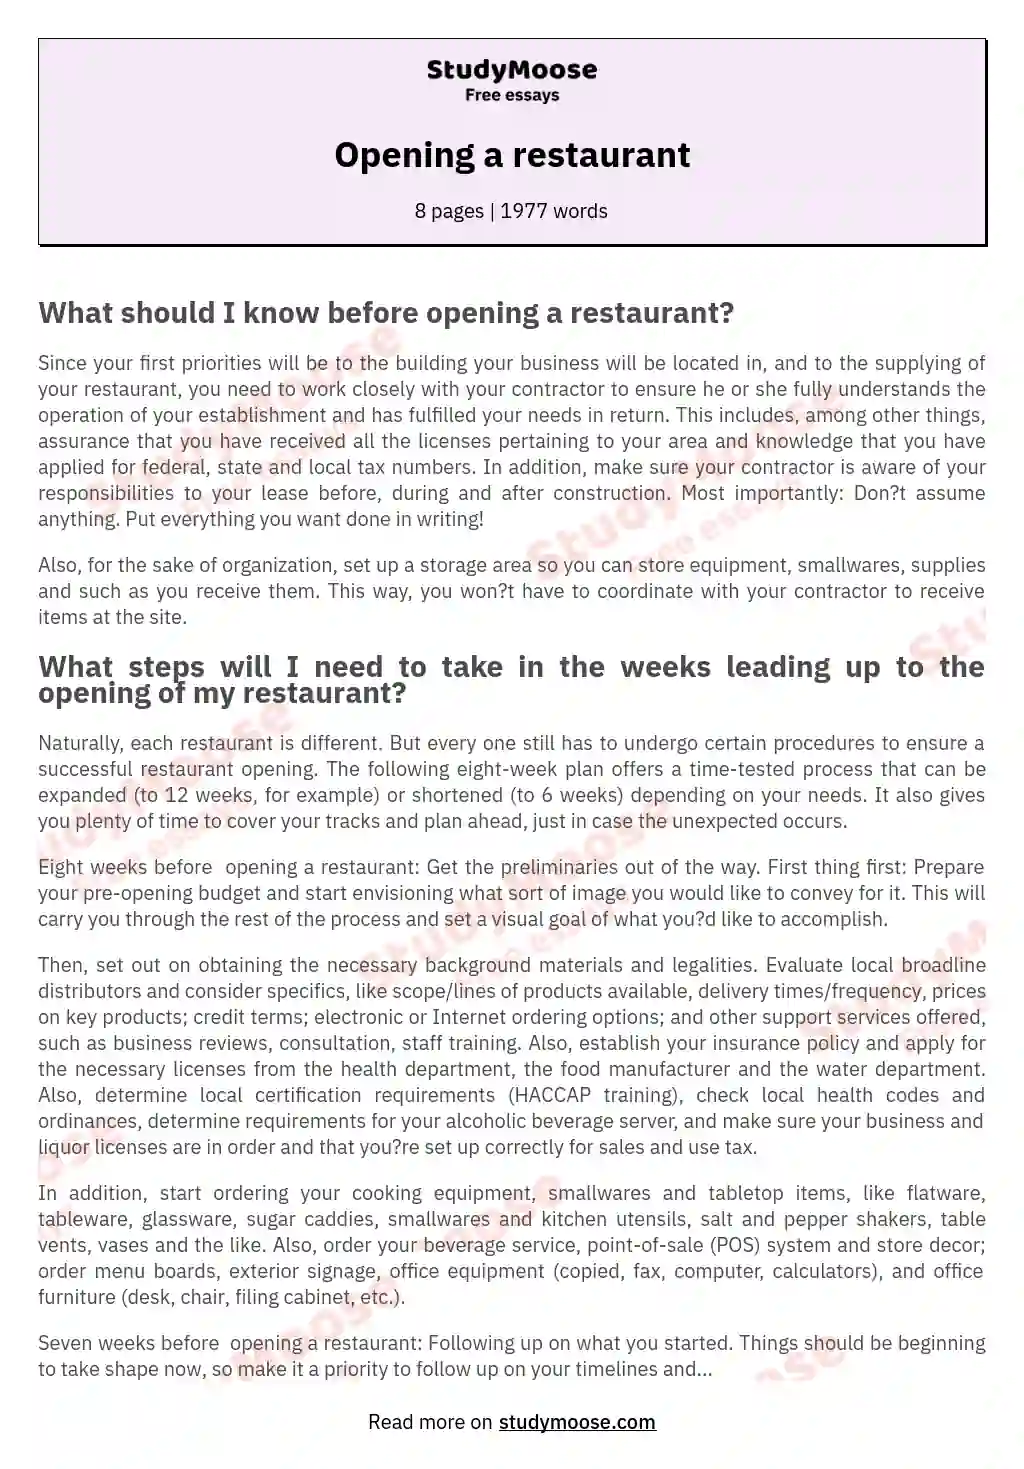 essay about a restaurant you visited